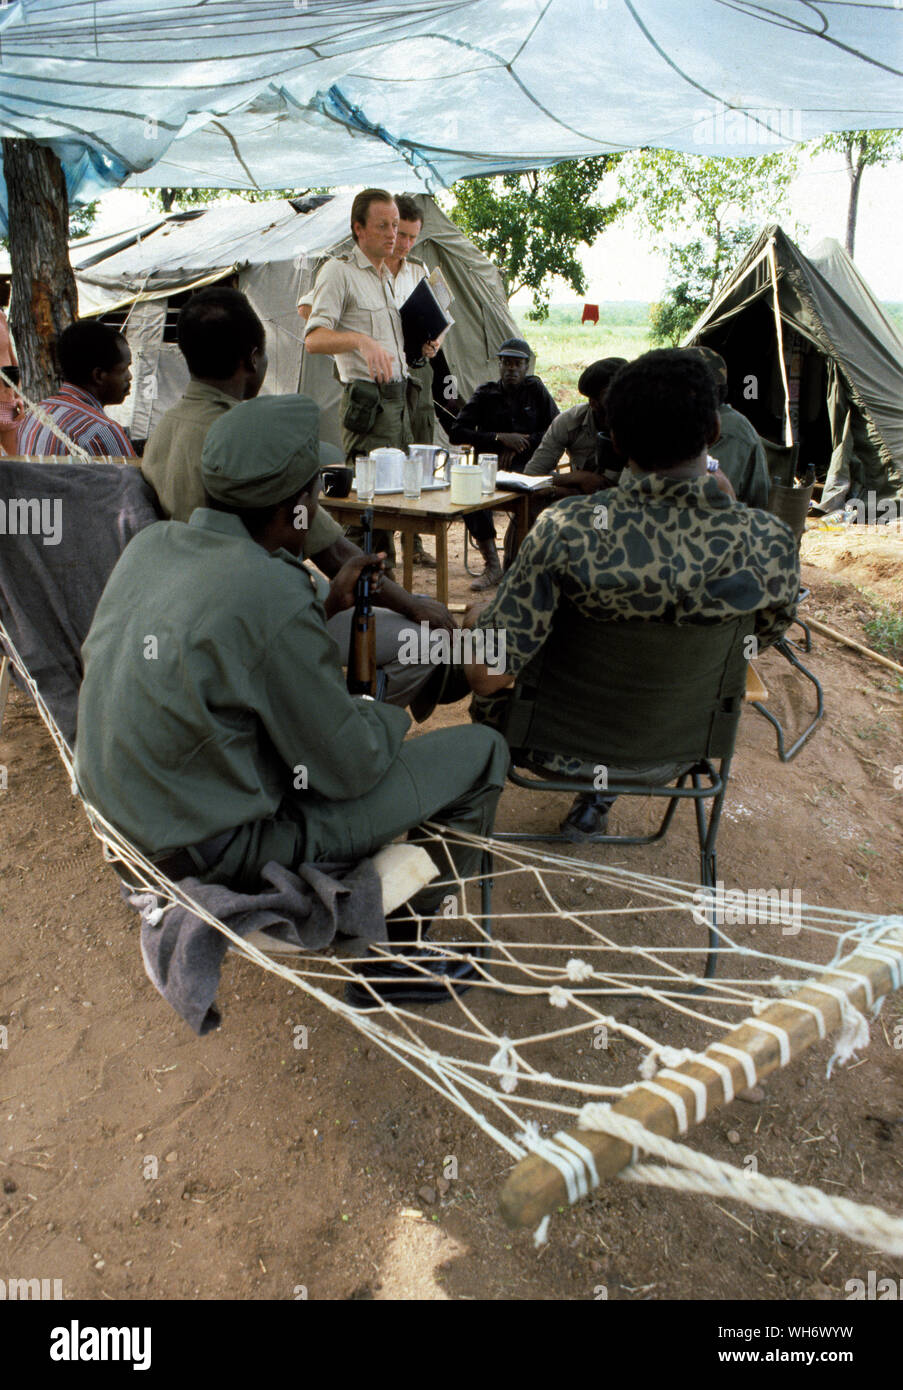 Lt Colonel Andrew Parker Bowles, centre with blue folder, at Camp Alpha, Rhodesia-Zimbabwe 1980. He is seen supervising the Patriotic Front troops coming in from the bush into British Army run holding camps in the Zambezi valley as part of the Lancaster House peace process after the Rhodesian civil war ended.  He was Senior Military Liaison Officer to Lord Soames, when he was Governor of Rhodesia during its transition to the majority rule state of Zimbabwe in 1979–1980. He was staff qualified (sq), and became a Lieutenant-Colonel 30 June 1980.AK47AK47 He was awarded the Queen's Commendation fo Stock Photo